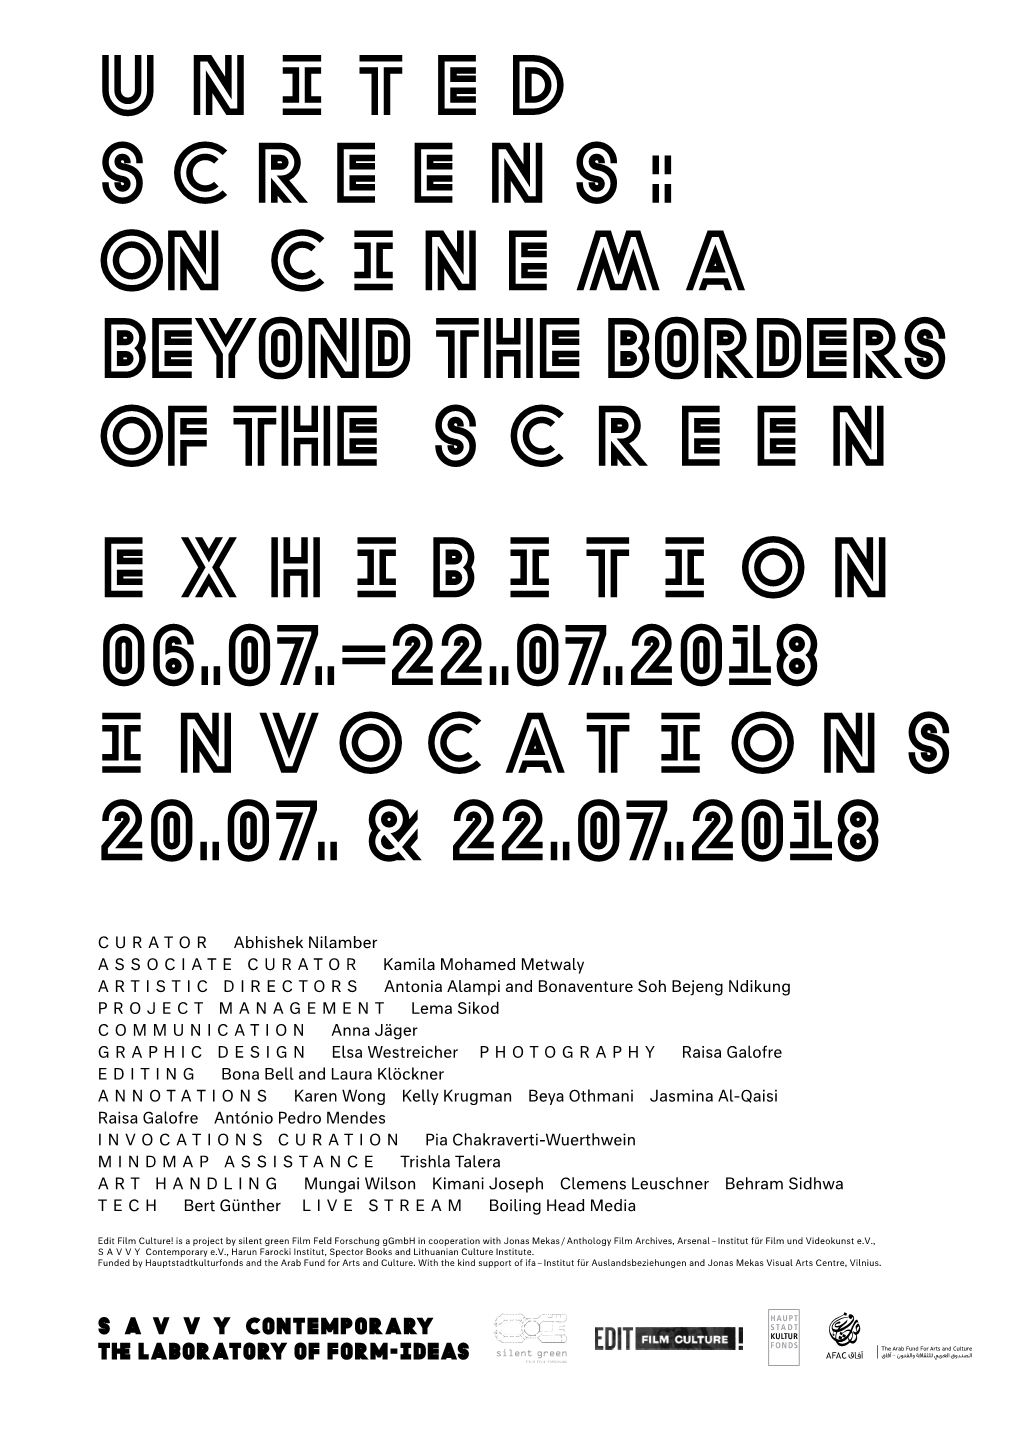 UNITED SCREENS: on CINEMA Beyond the Borders of the S C R E E N EXHIBITION 06.07.–22.07.2018 INVOCATIONS 20.07. & 22.0